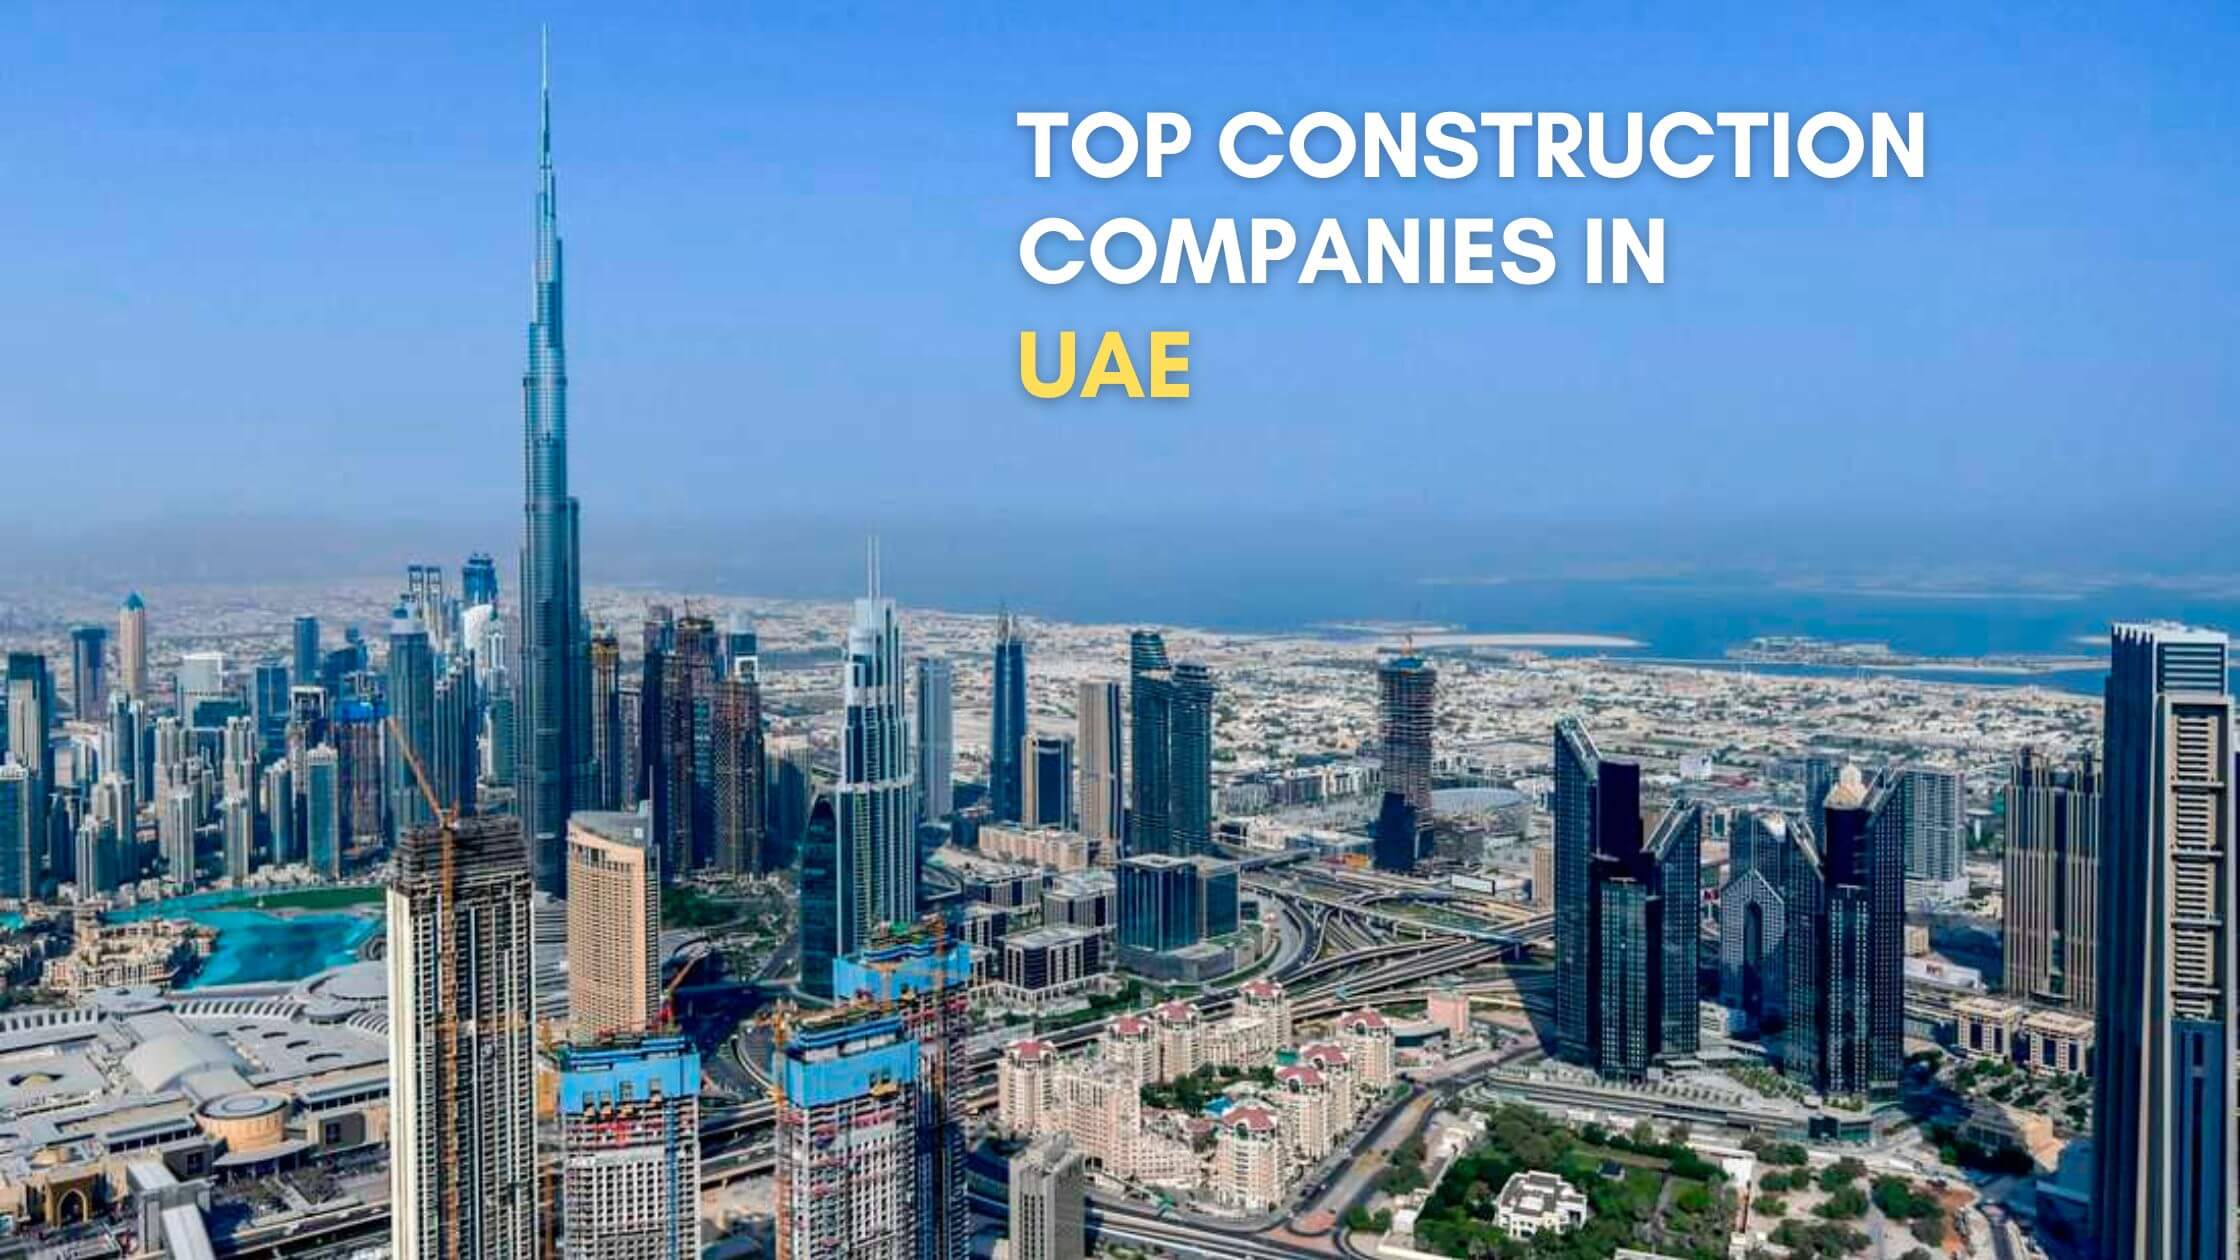 TOP CONSTRUCTION COMPANIES IN UAE